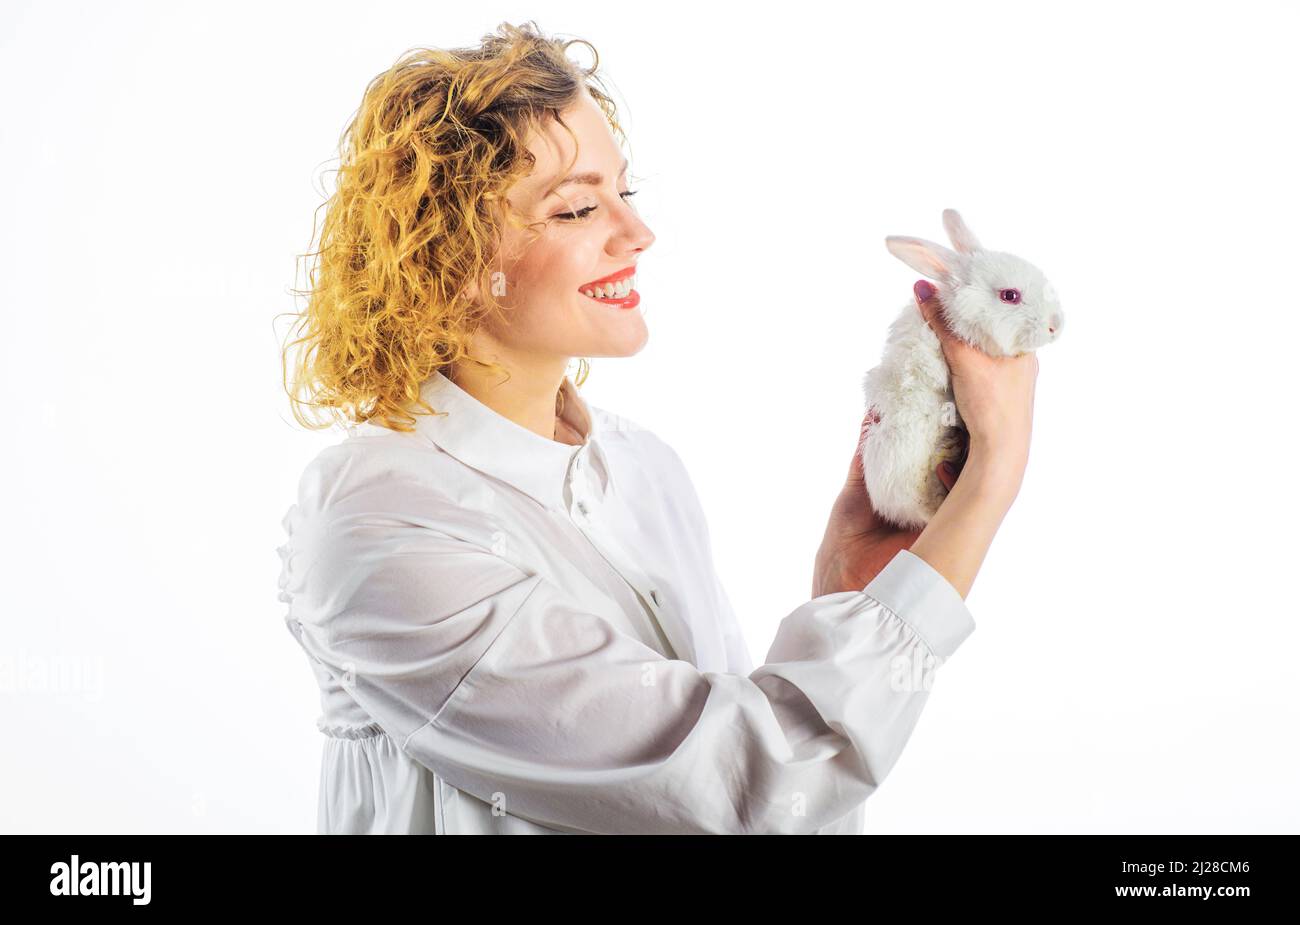 Happy woman with white baby rabbit. Smiling Girl with little Easter bunny. Cute furry hare. Stock Photo